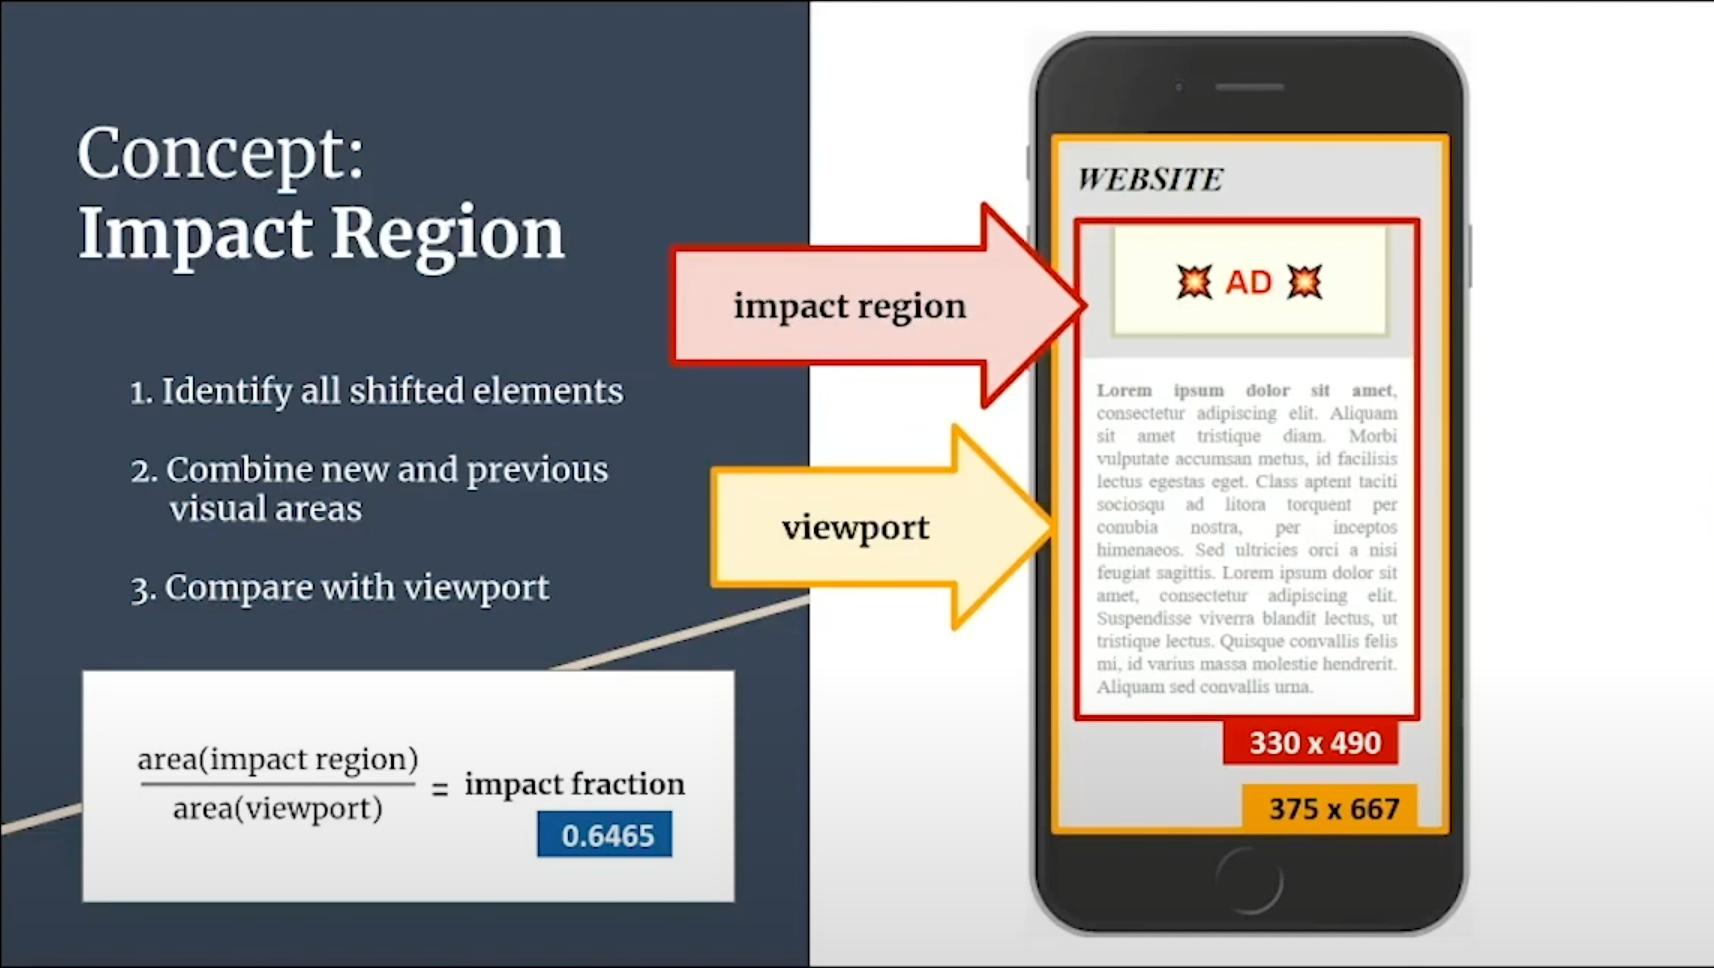 Figure 4: Visualization of the impact region and viewport, with the equation to calculate the impact fraction. Source: YouTube.